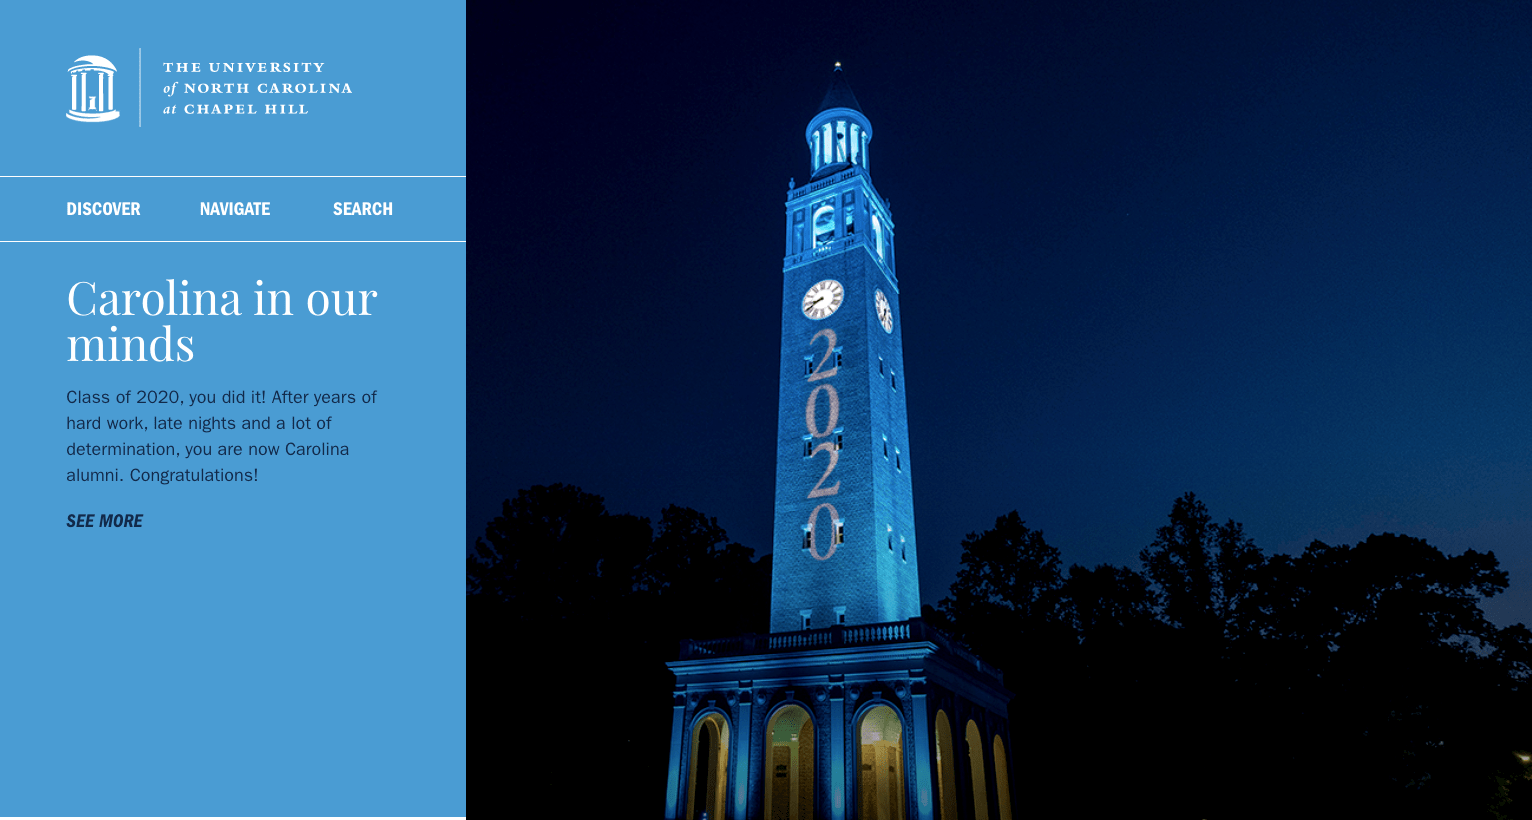 A screenshot of the University of North Carolina at Chapel Hill's homepage with a simple navigation and message to the class of 2020.